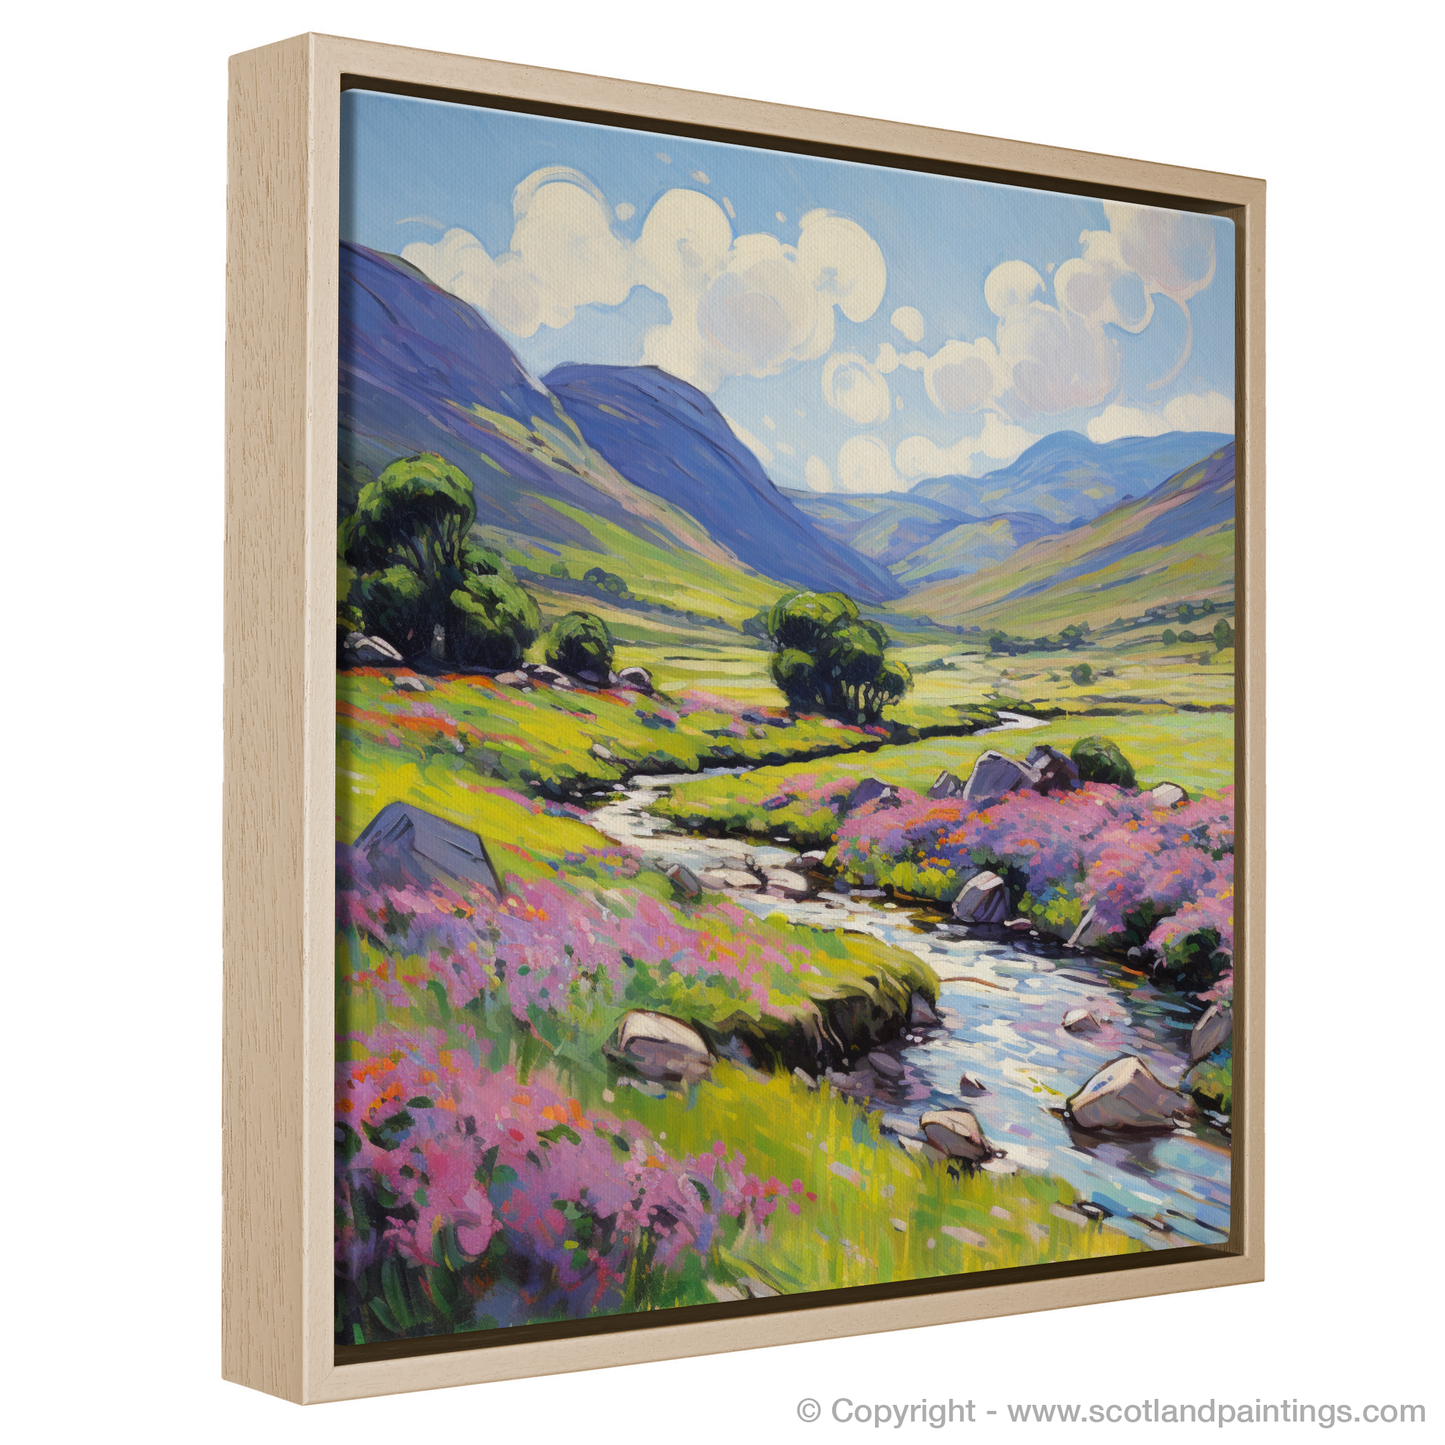 Painting and Art Print of Glen Doll, Angus in summer entitled "Summer Serenade at Glen Doll, Angus".